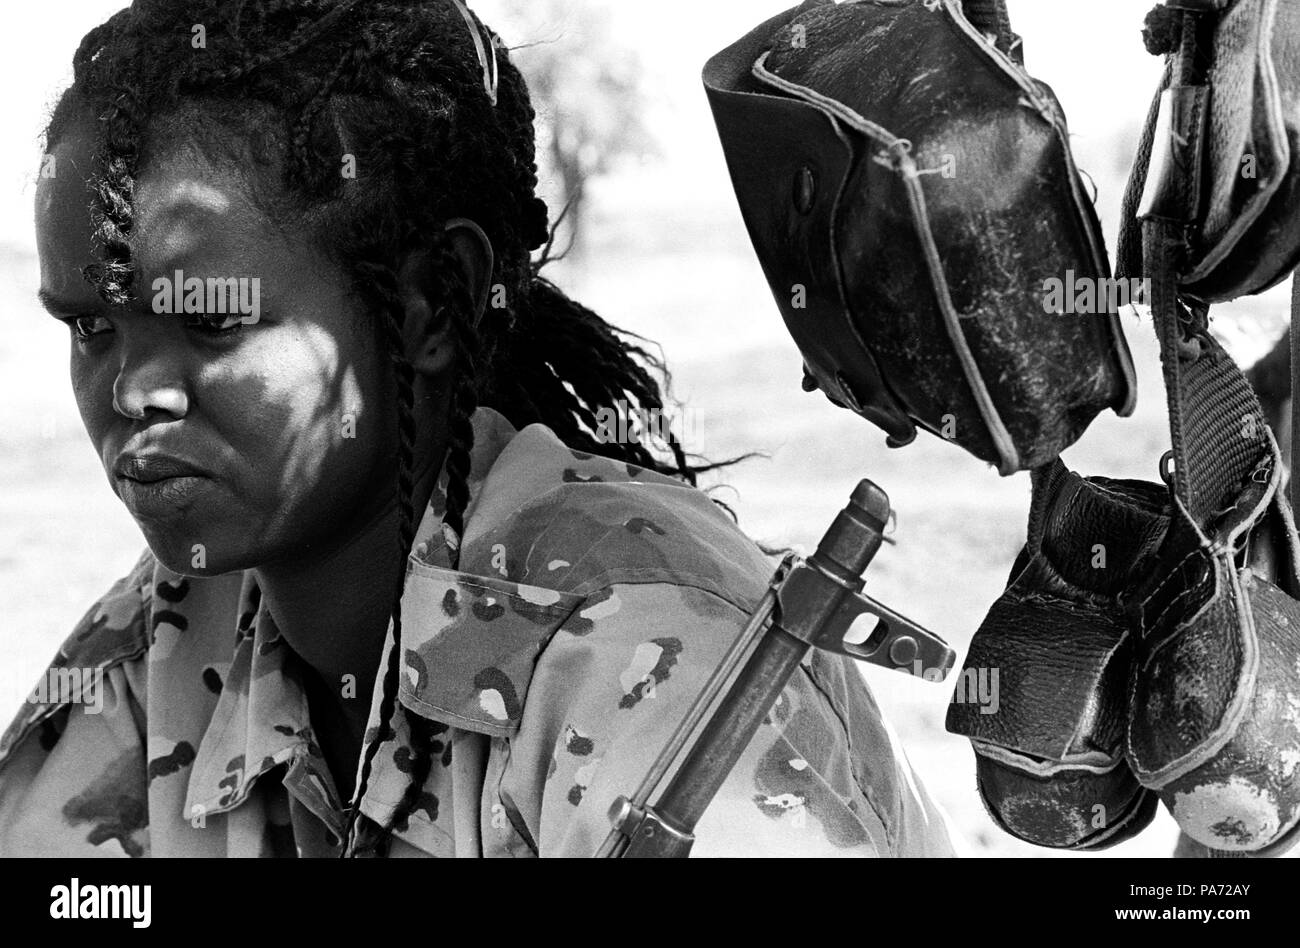 Eritrean Soldier High Resolution Stock Photography and Images - Alamy